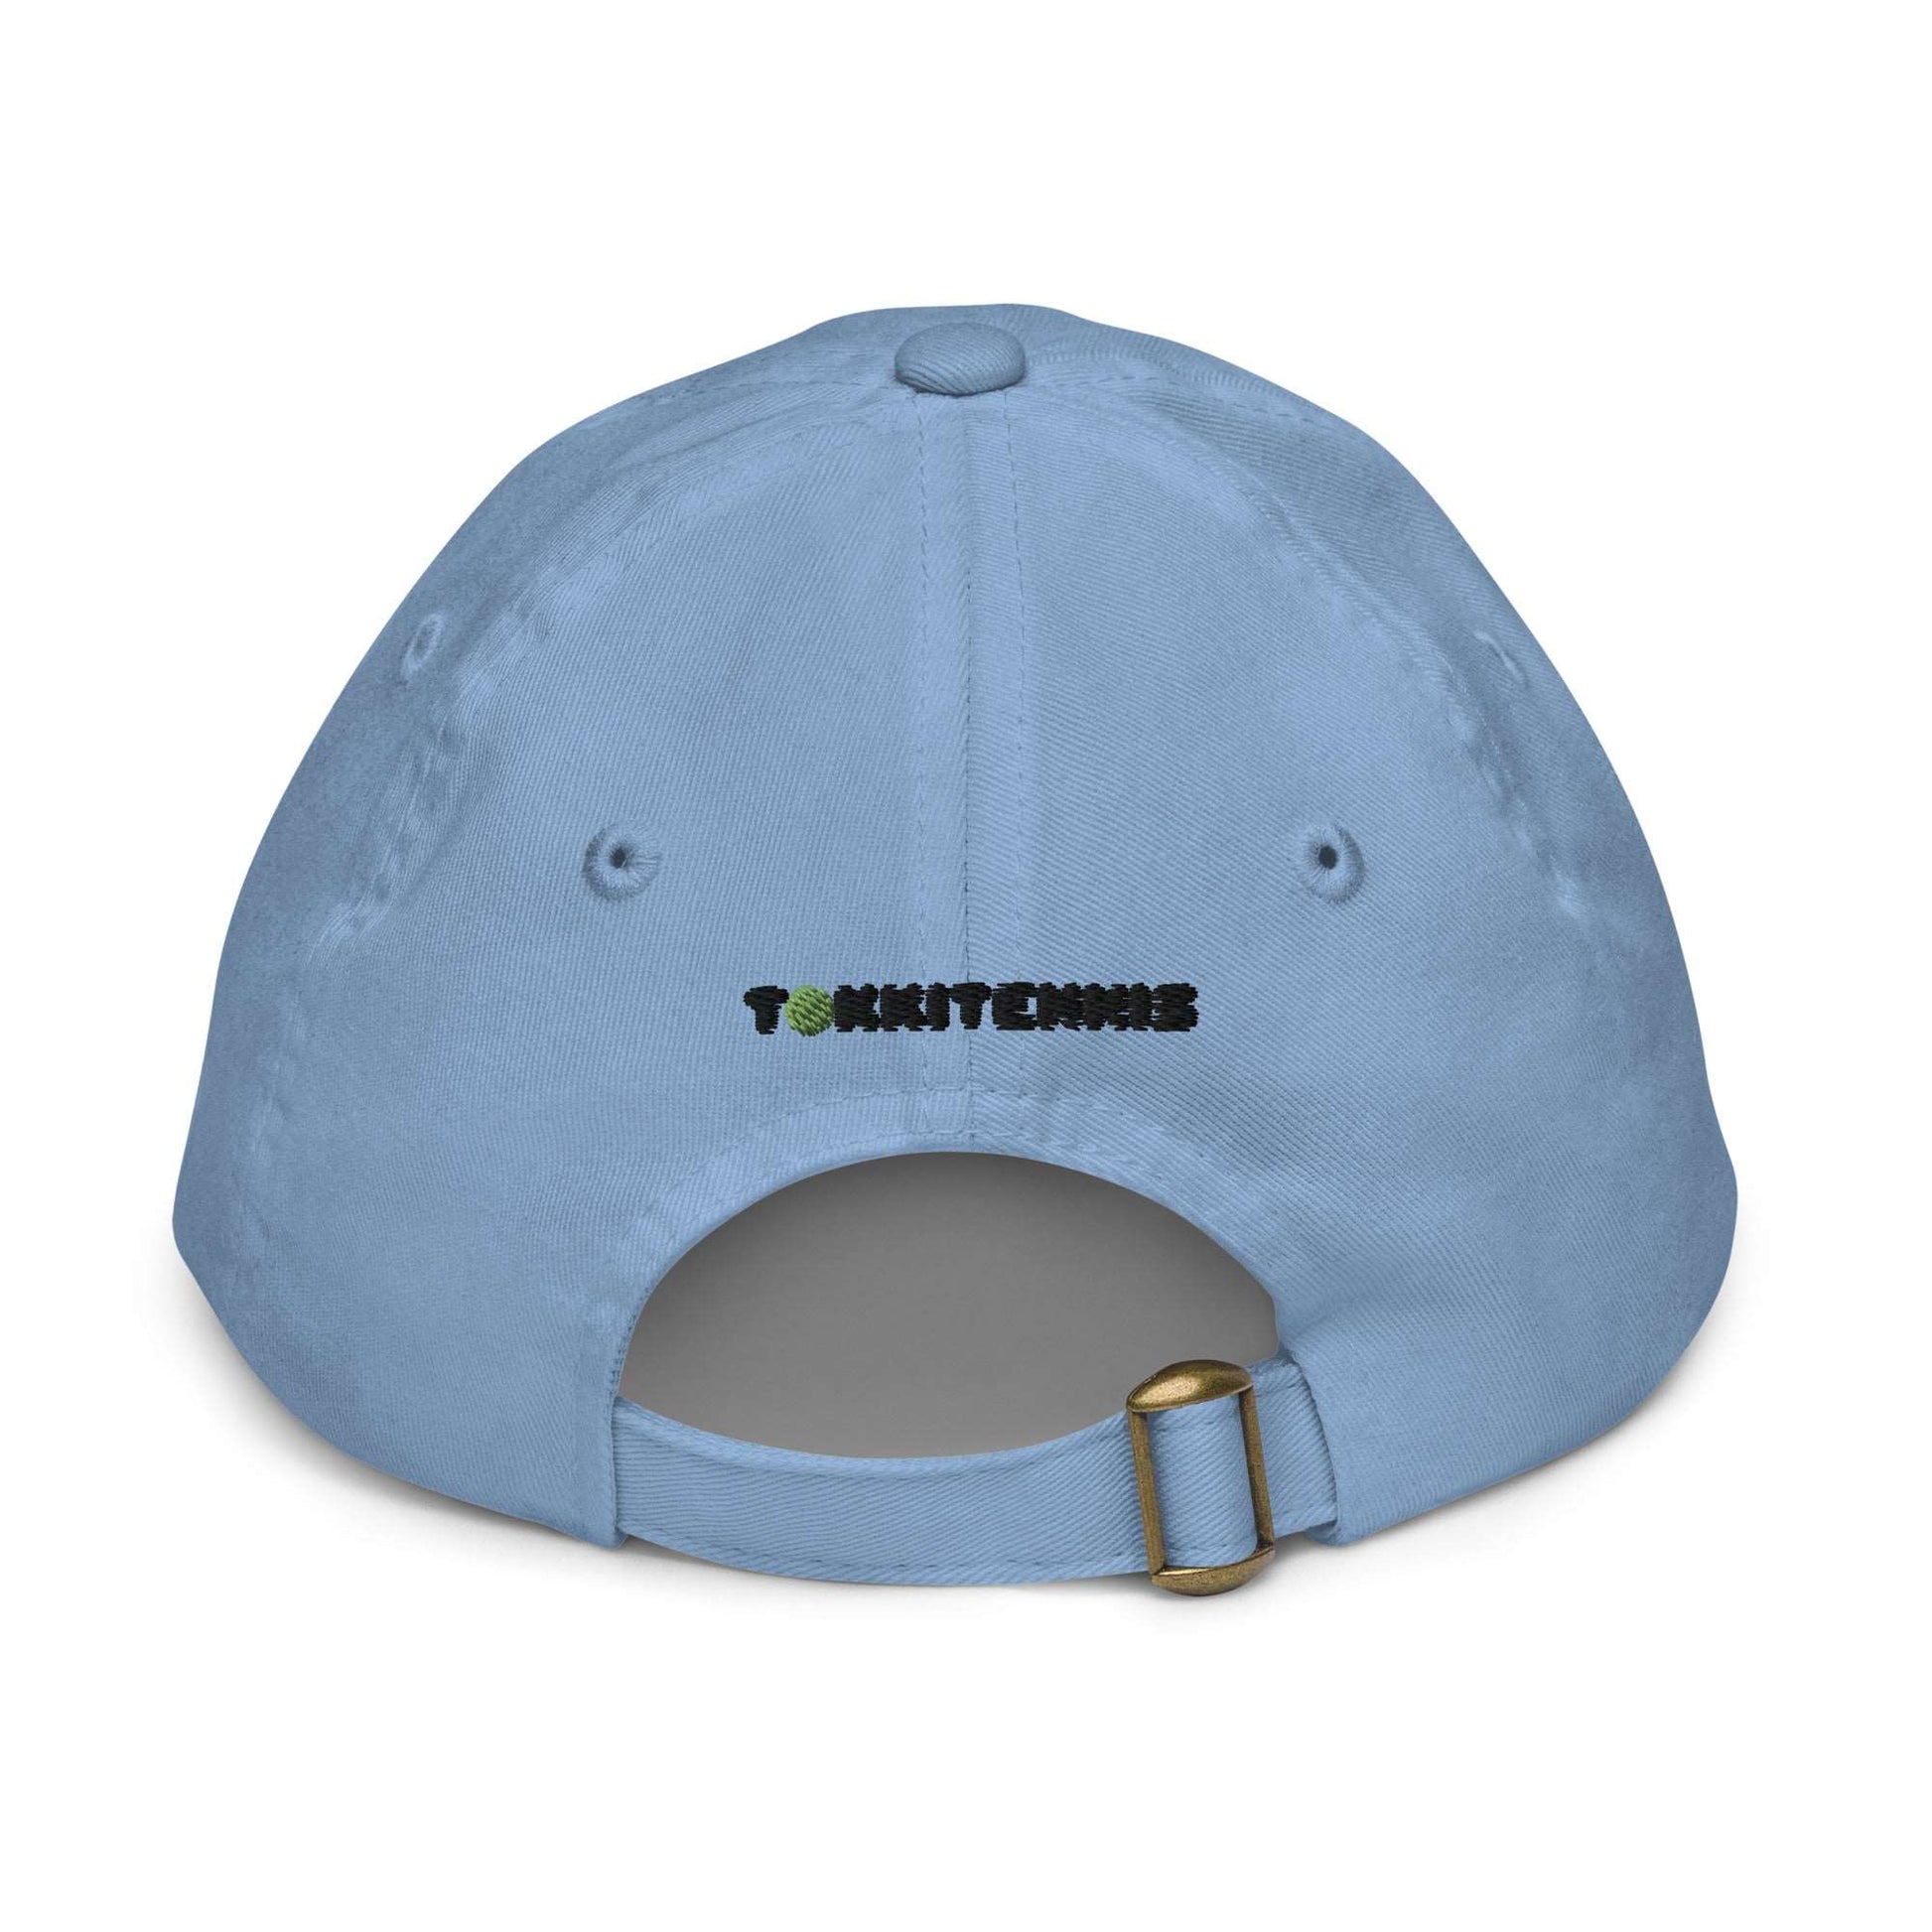 Youth Emma Baseball Cap - Available in Blue, White, Pink - TOKKITENNIS